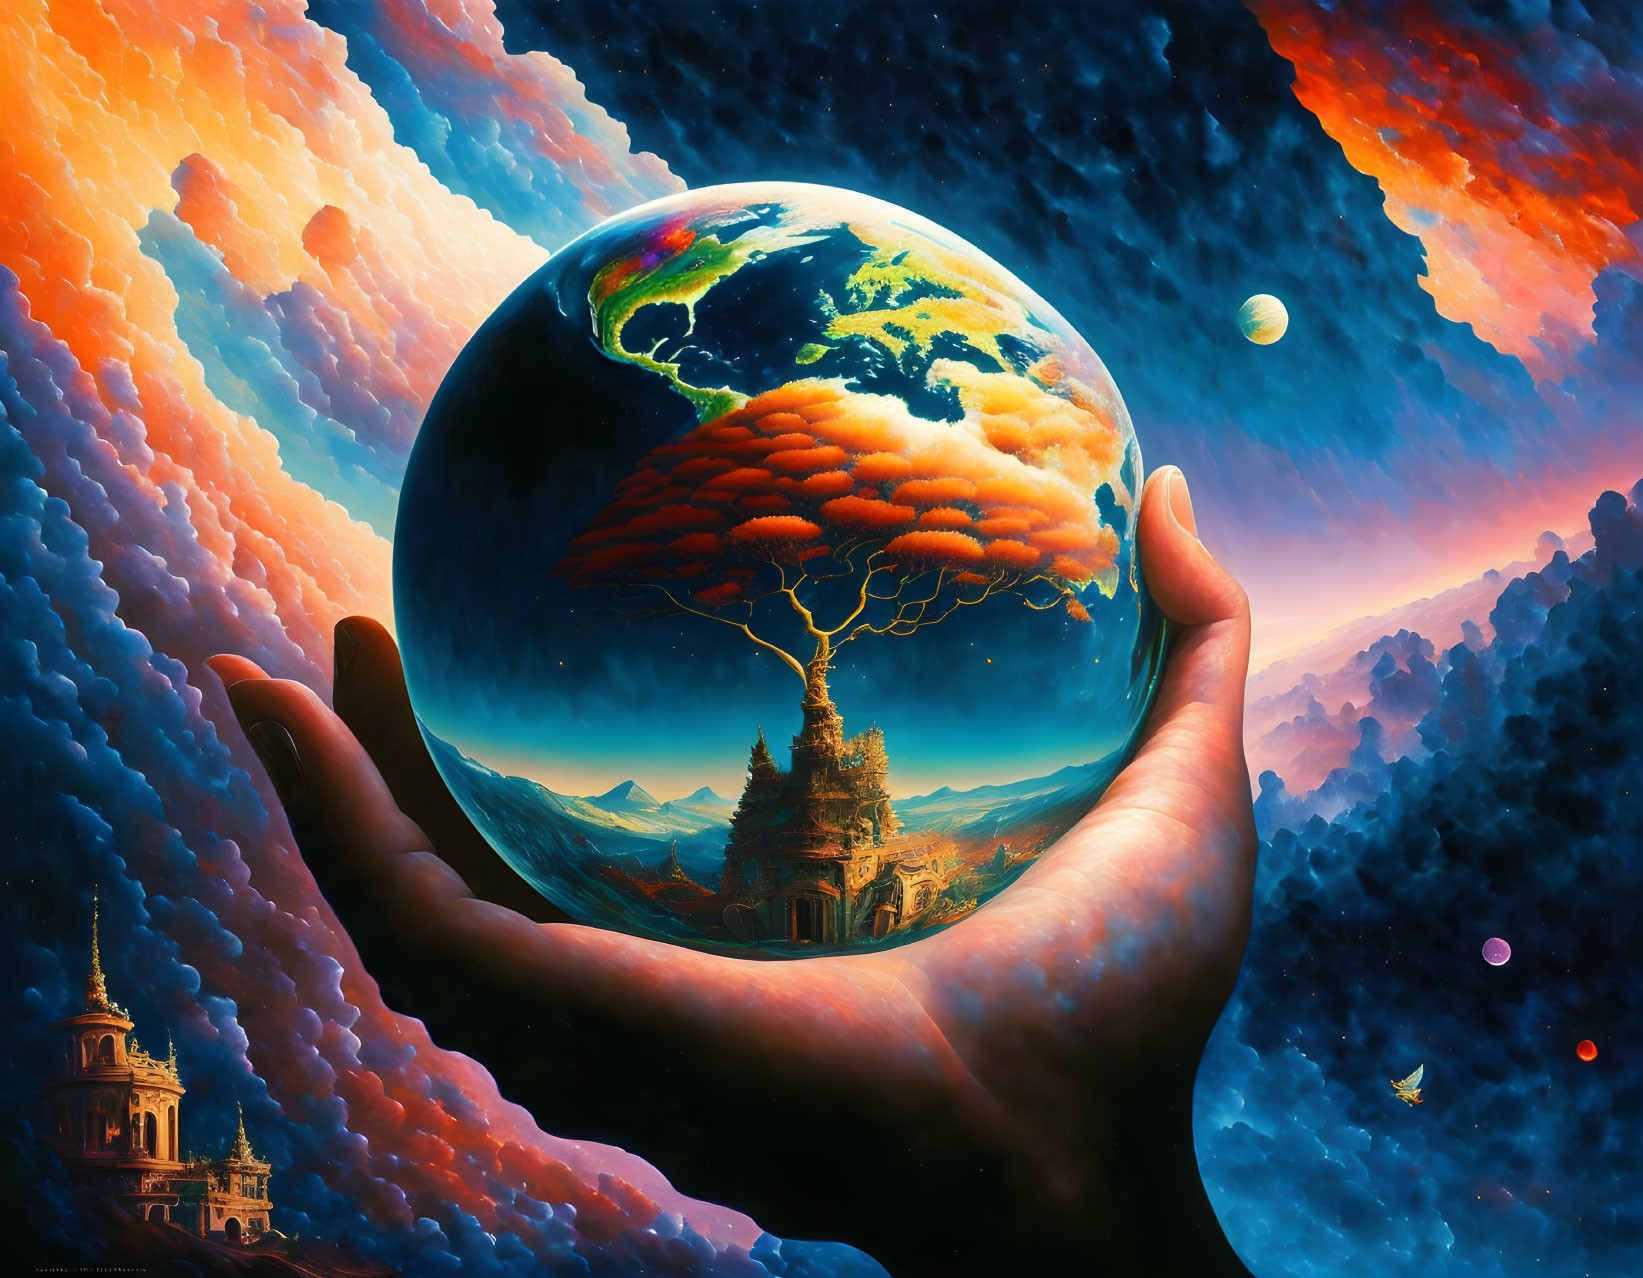 Surreal painting of hands holding earth-like globe with tree amid cosmic clouds